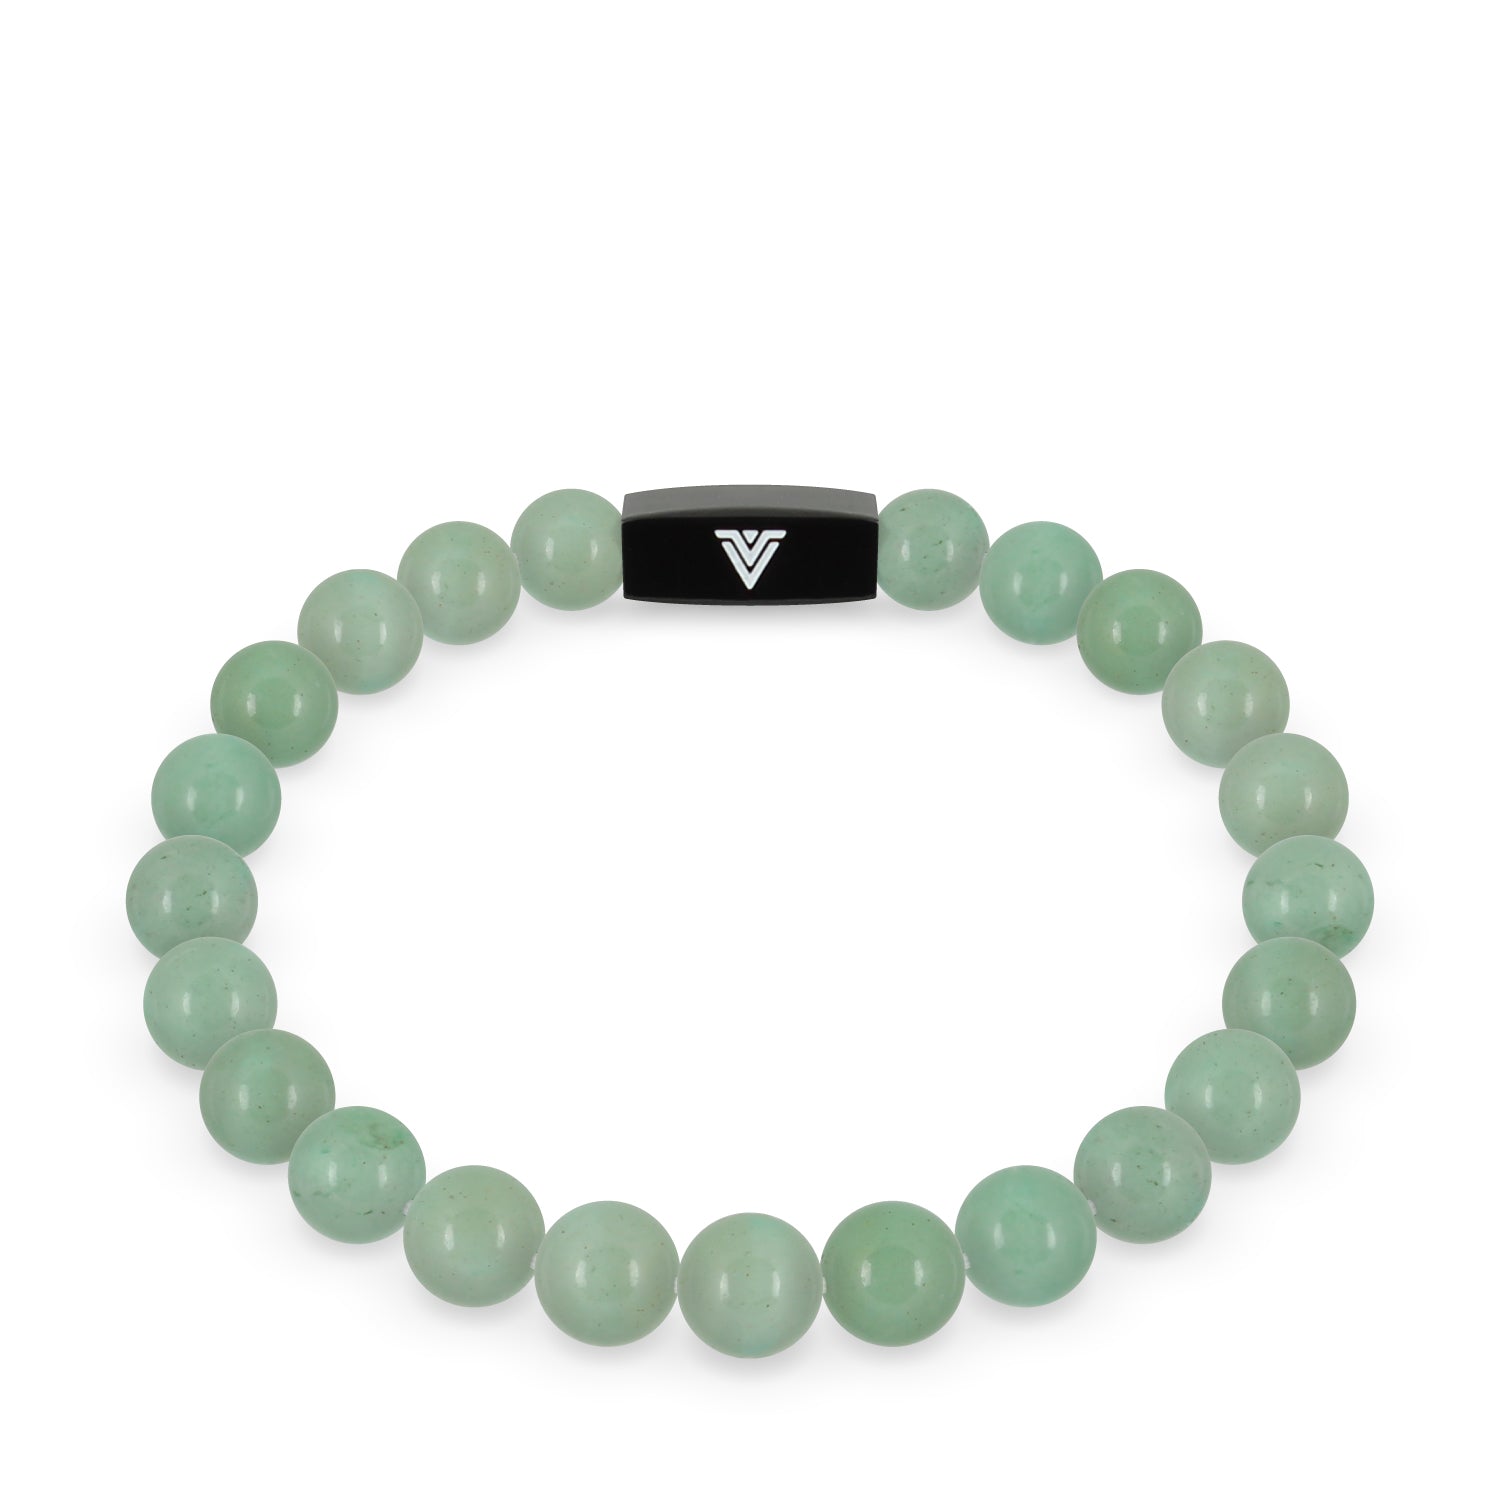 Front view of an 8mm Green Aventurine crystal beaded stretch bracelet with black stainless steel logo bead made by Voltlin